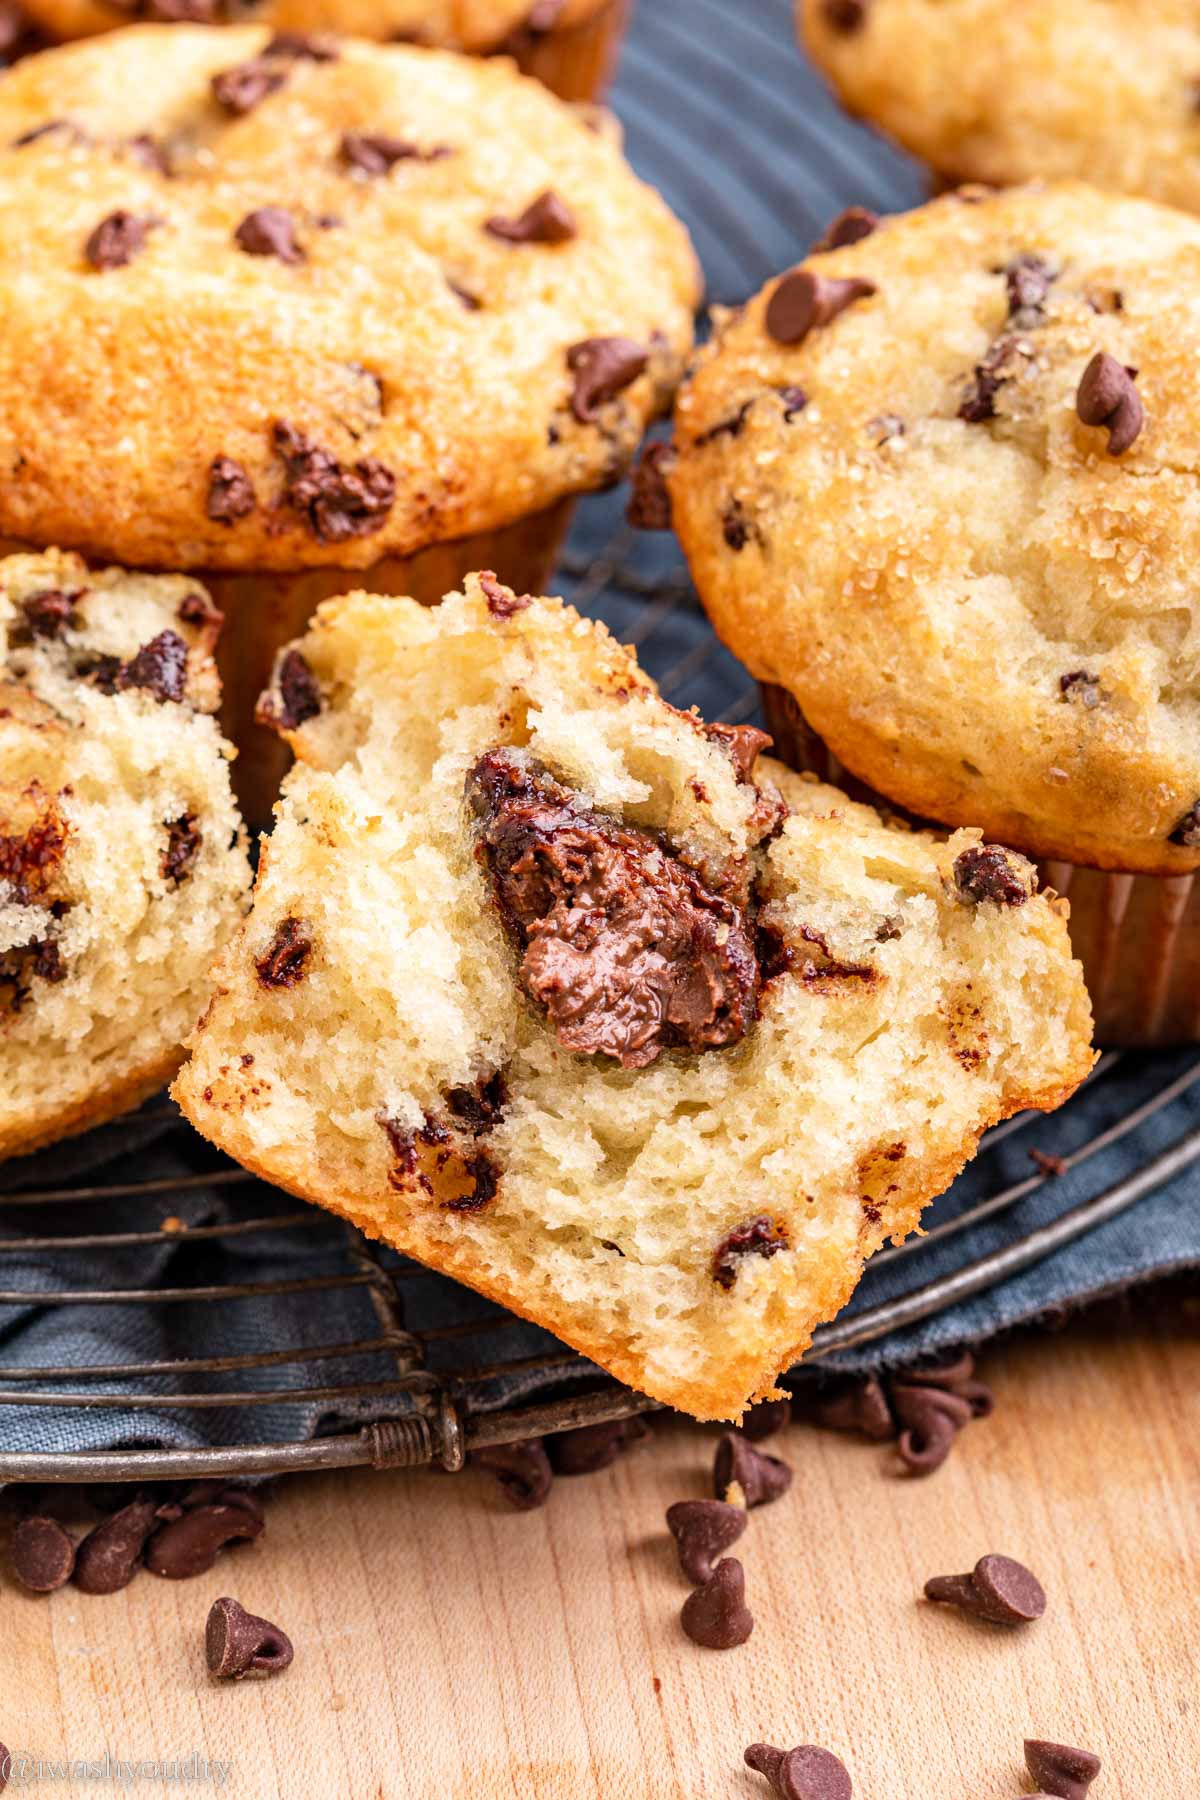 https://iwashyoudry.com/wp-content/uploads/2013/07/Nutella-Chocolate-Chip-Muffins-15-of-20-1.jpg